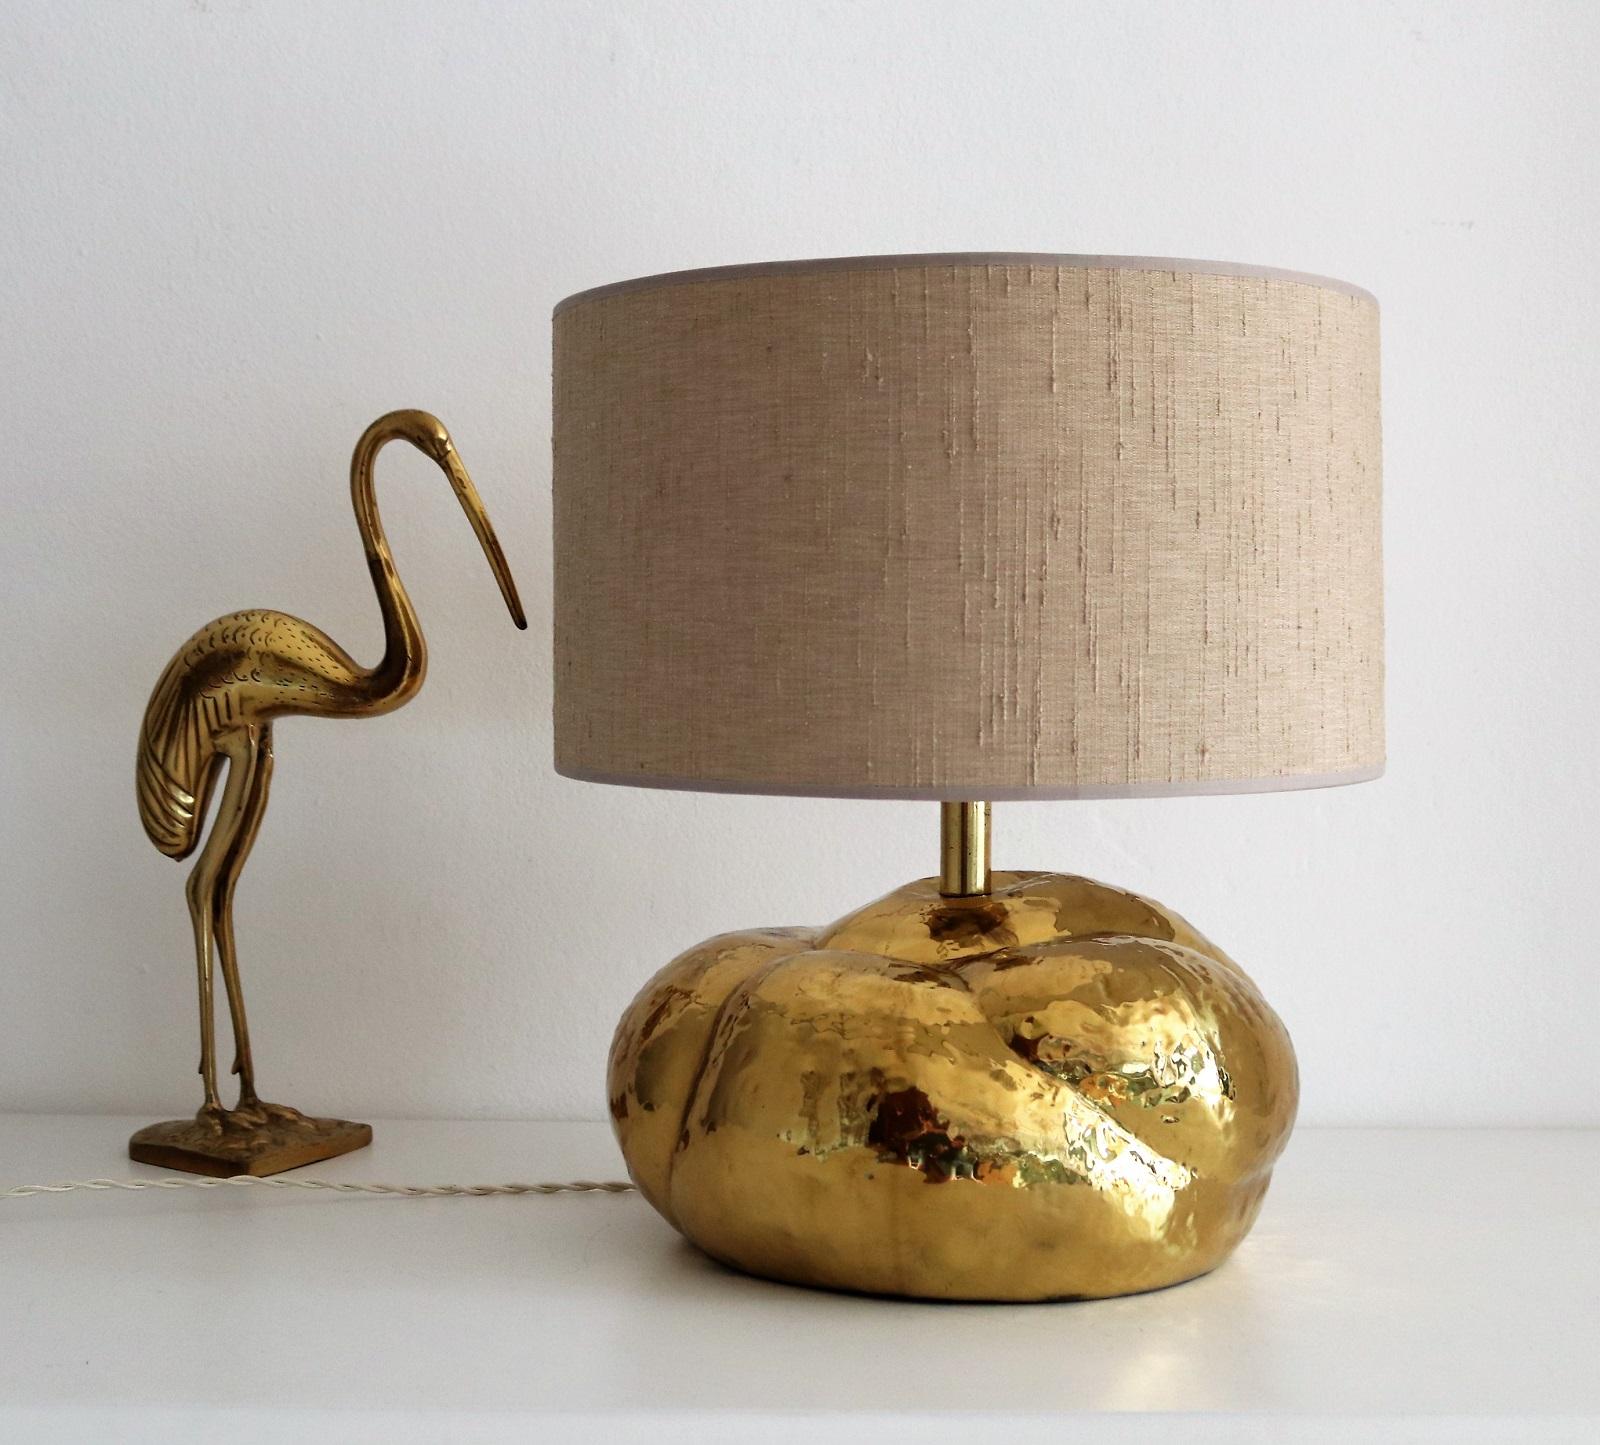 Gorgeous brass table lamp, handmade by artisan in the 1950s, made in Italy.
This beautiful lamp has the shape of a real big organic pumpkin and is made of shiny brass with partly beautiful patina and some darker spots.
The lamp have been revised